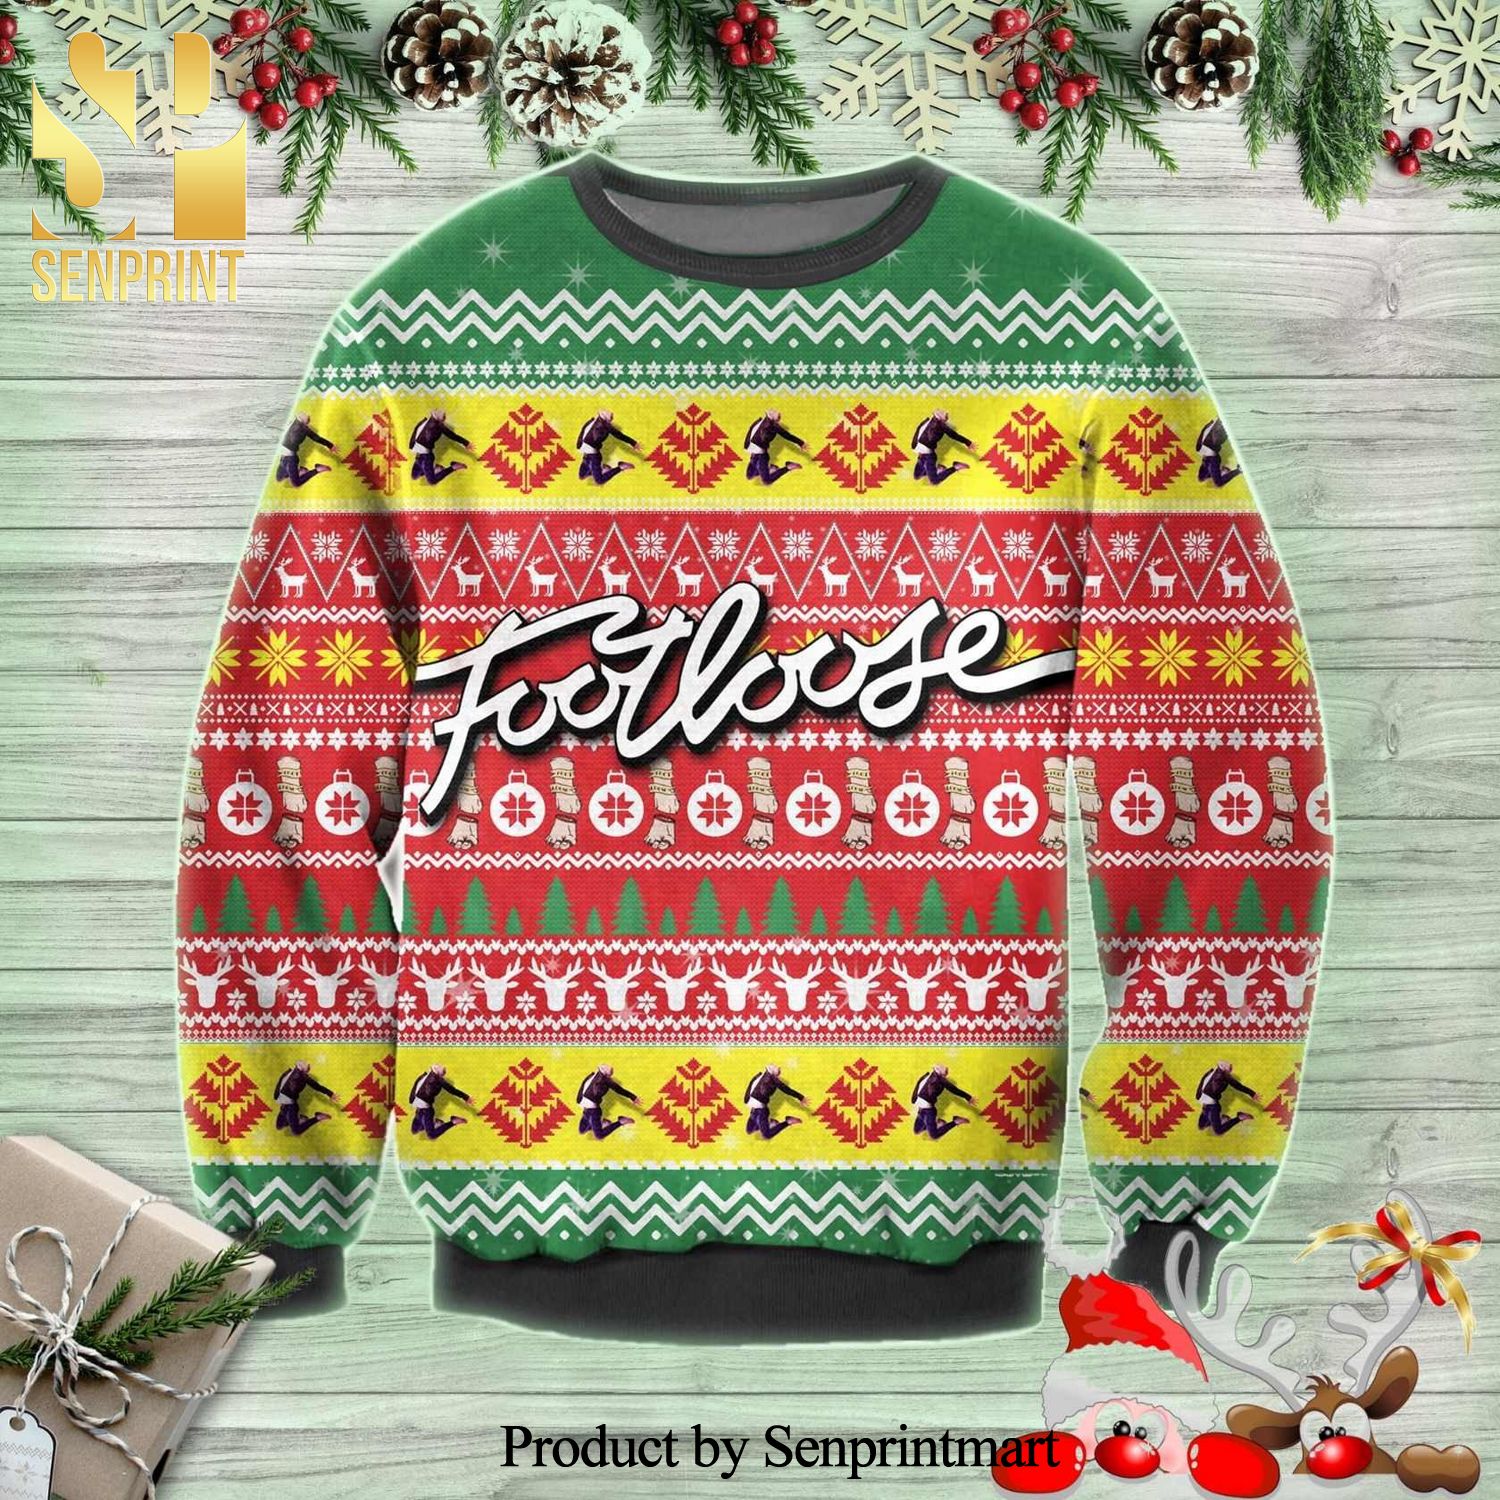 Footloose The Movie Knitted Ugly Christmas Sweater